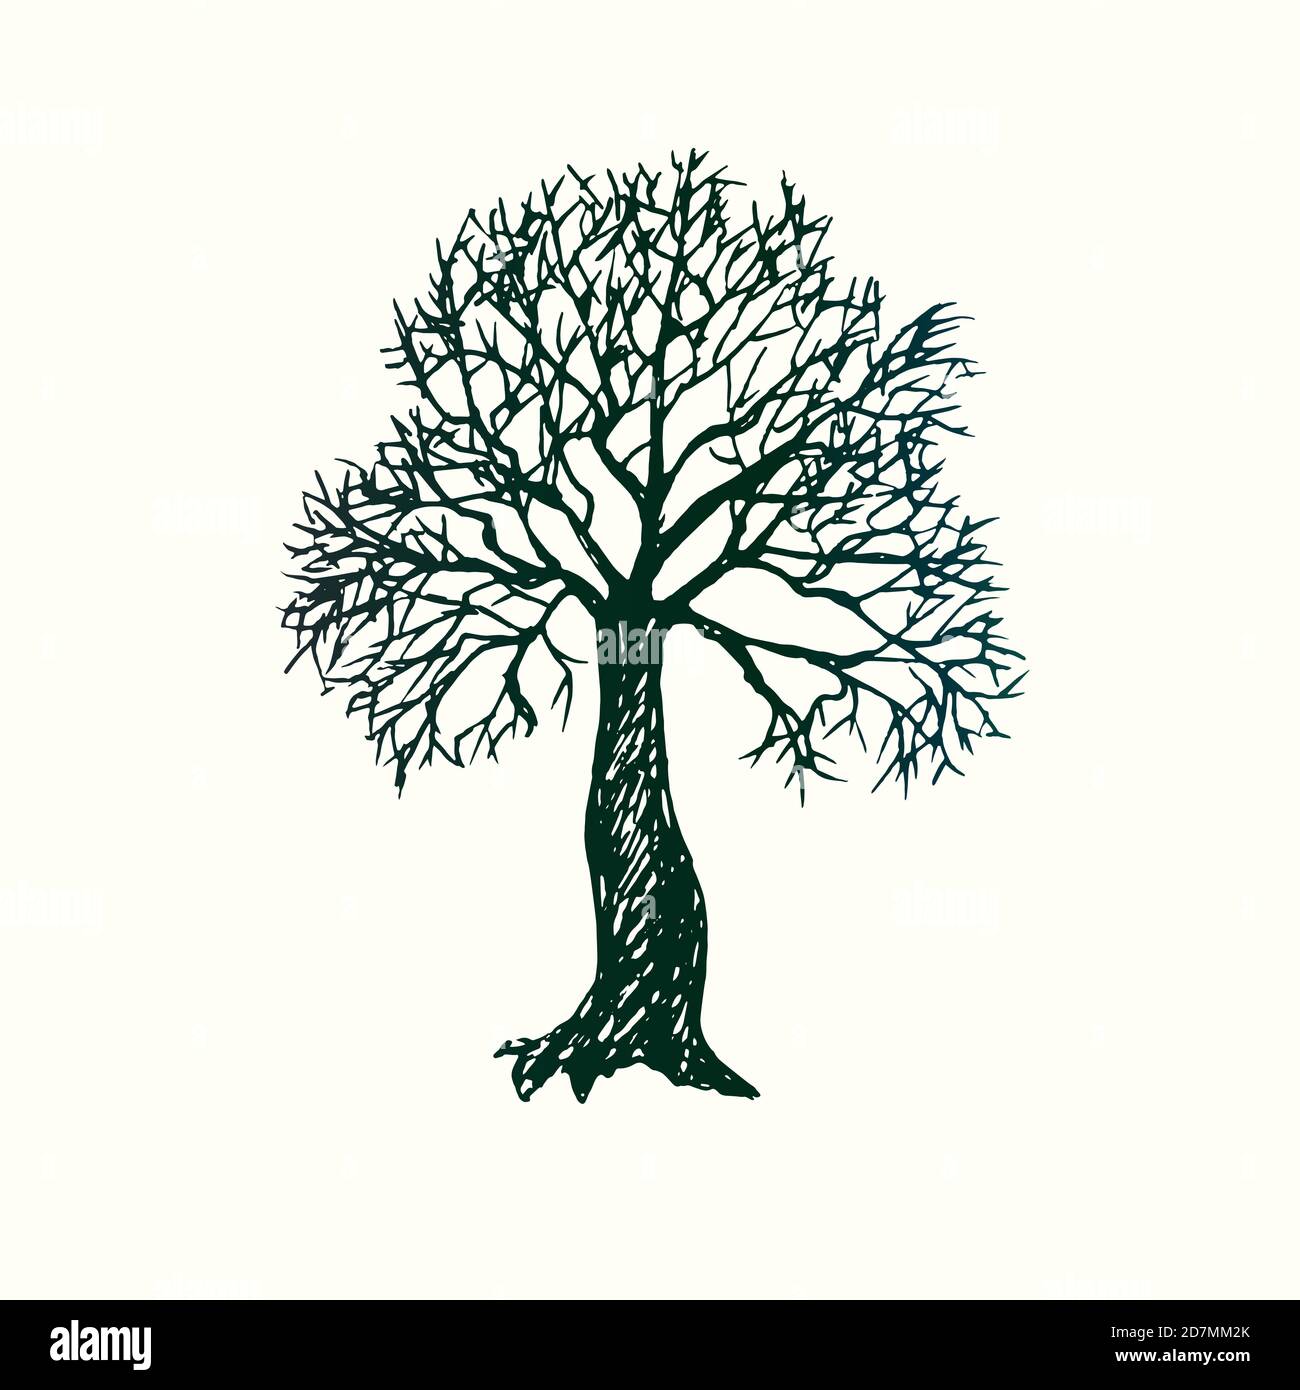 Tree silhouette, hand drawn doodle, sketch in pop art style, black and  white illustration Stock Photo - Alamy